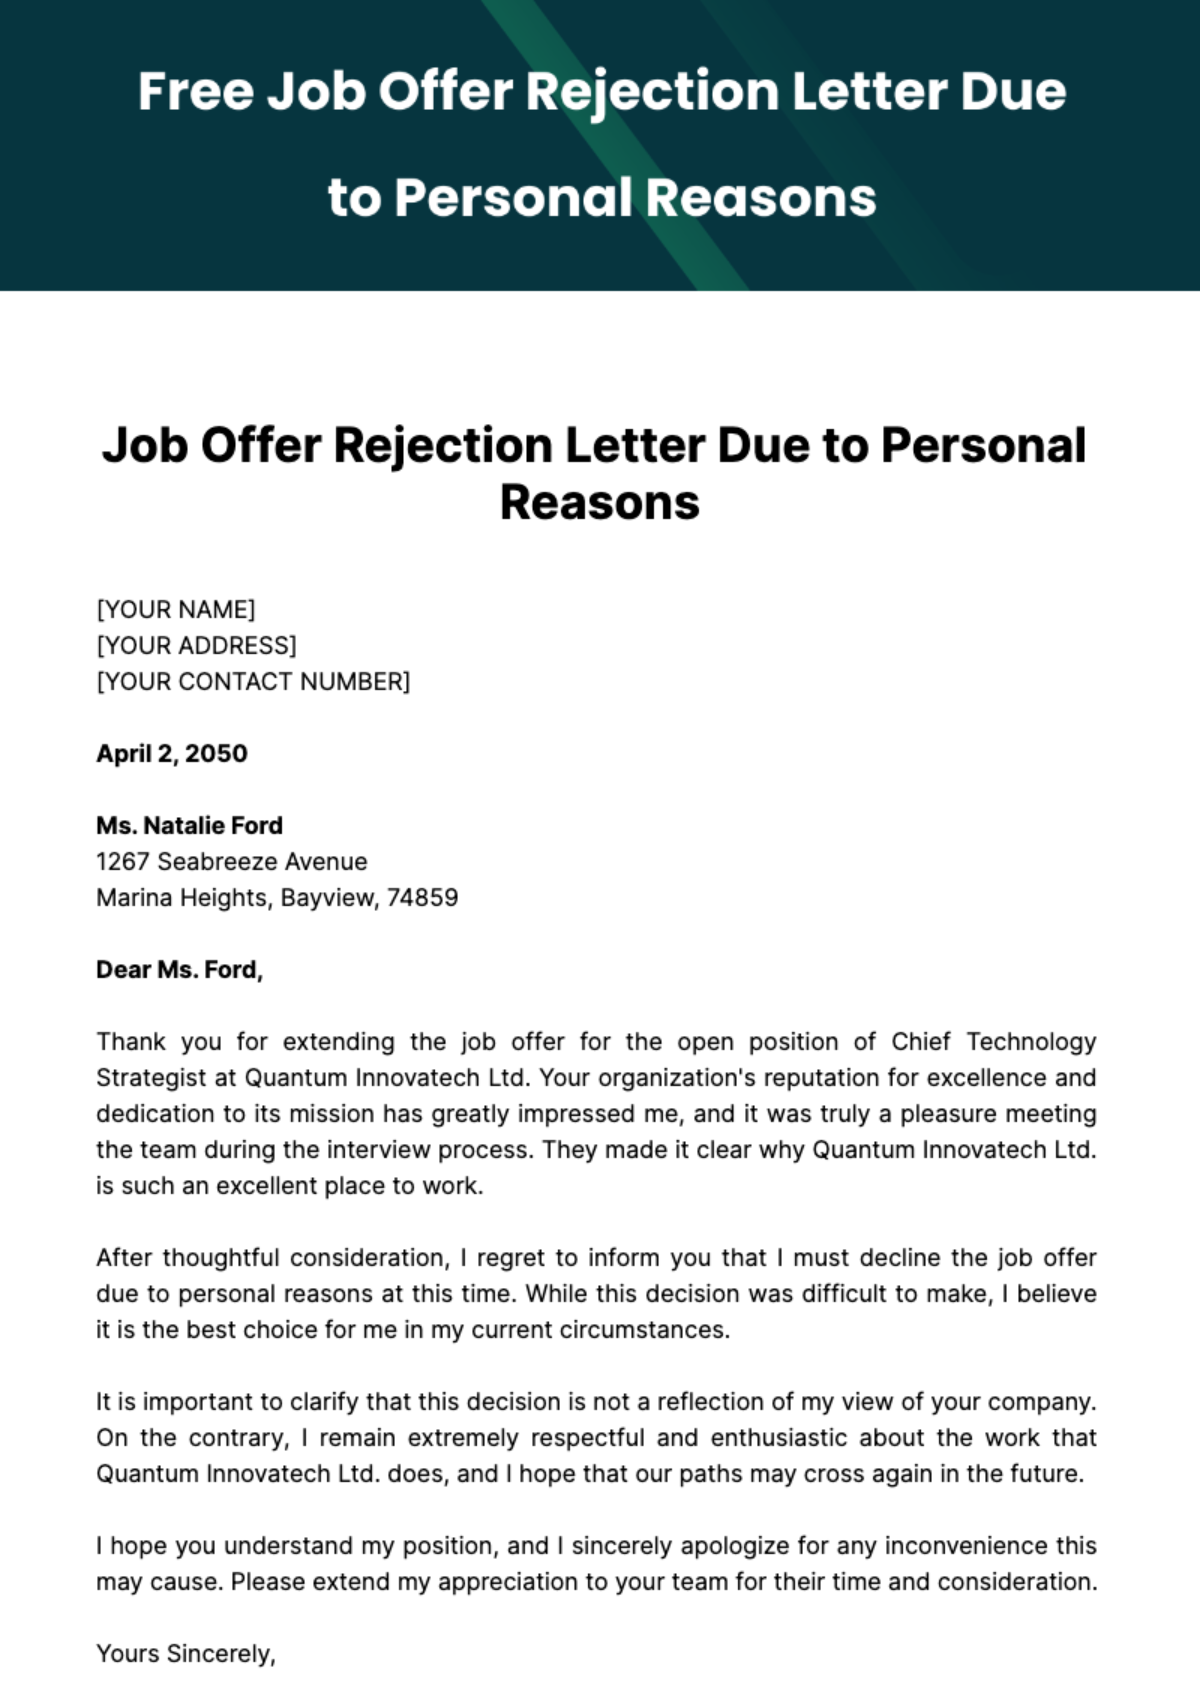 Free Job Offer Rejection Letter Due to Personal Reasons Template